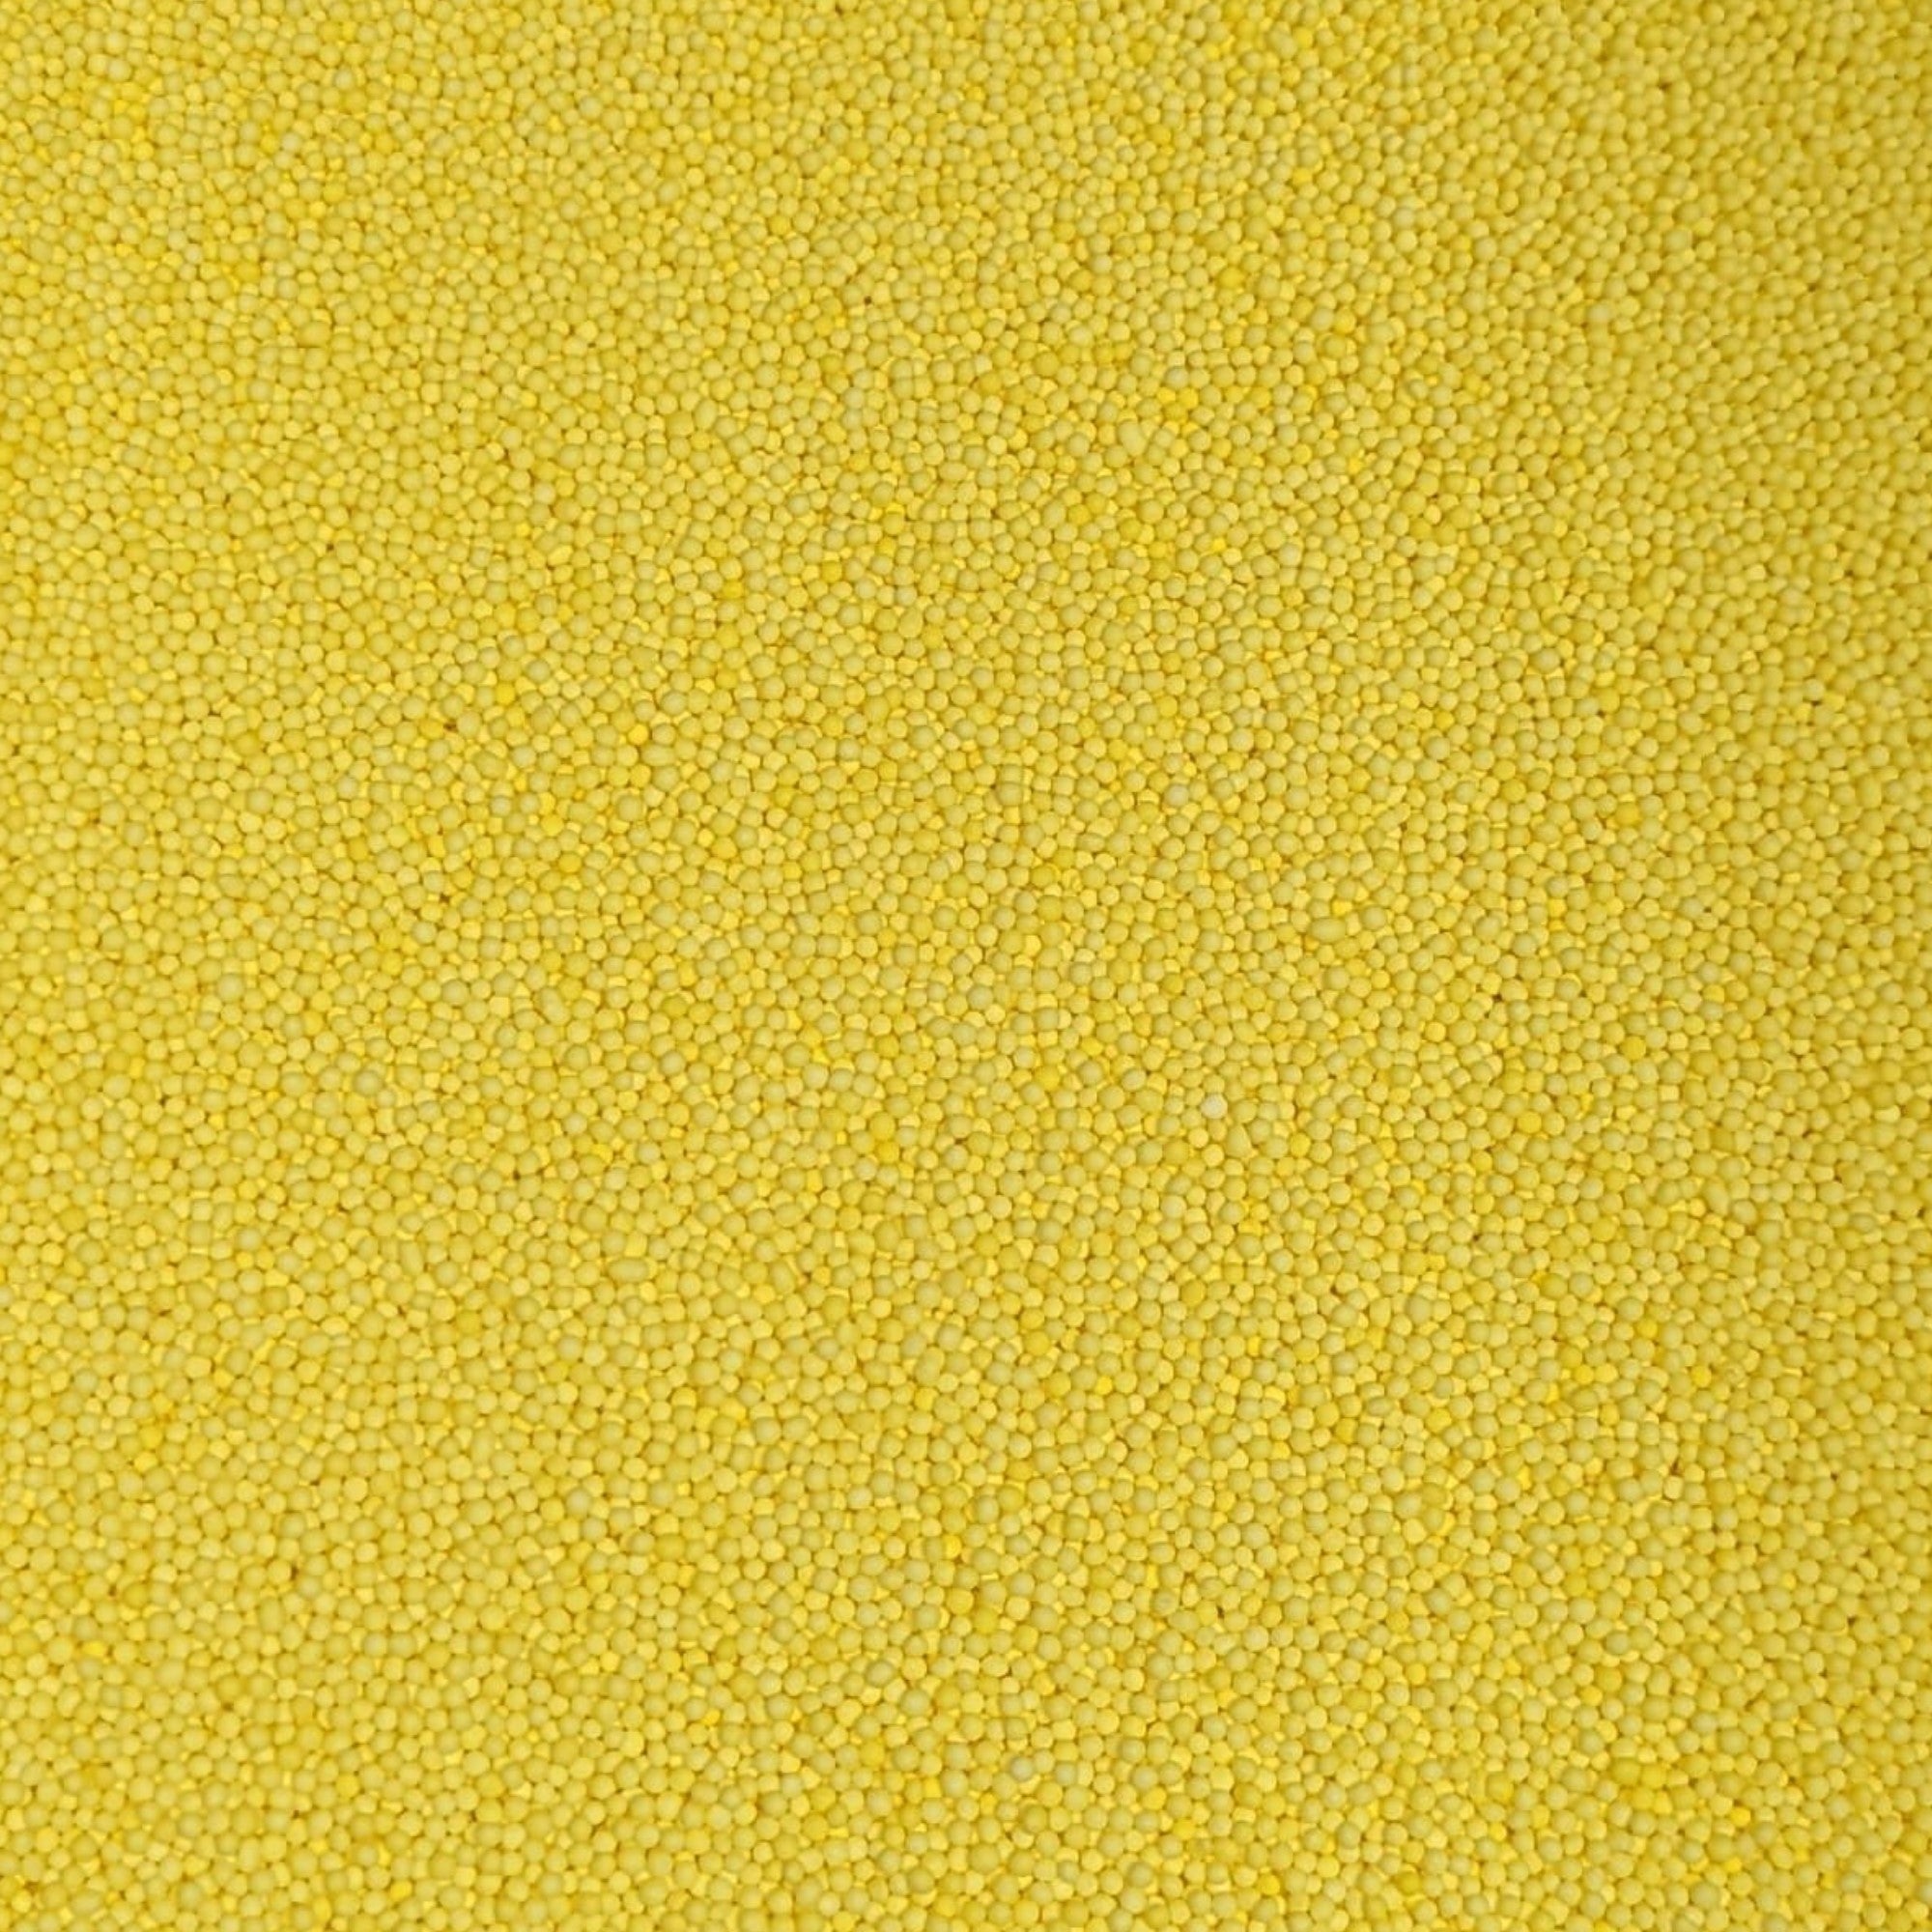 Yellow Matt 100s & 1000s Cupcake / Cake Decoration Sprinkles Toppers